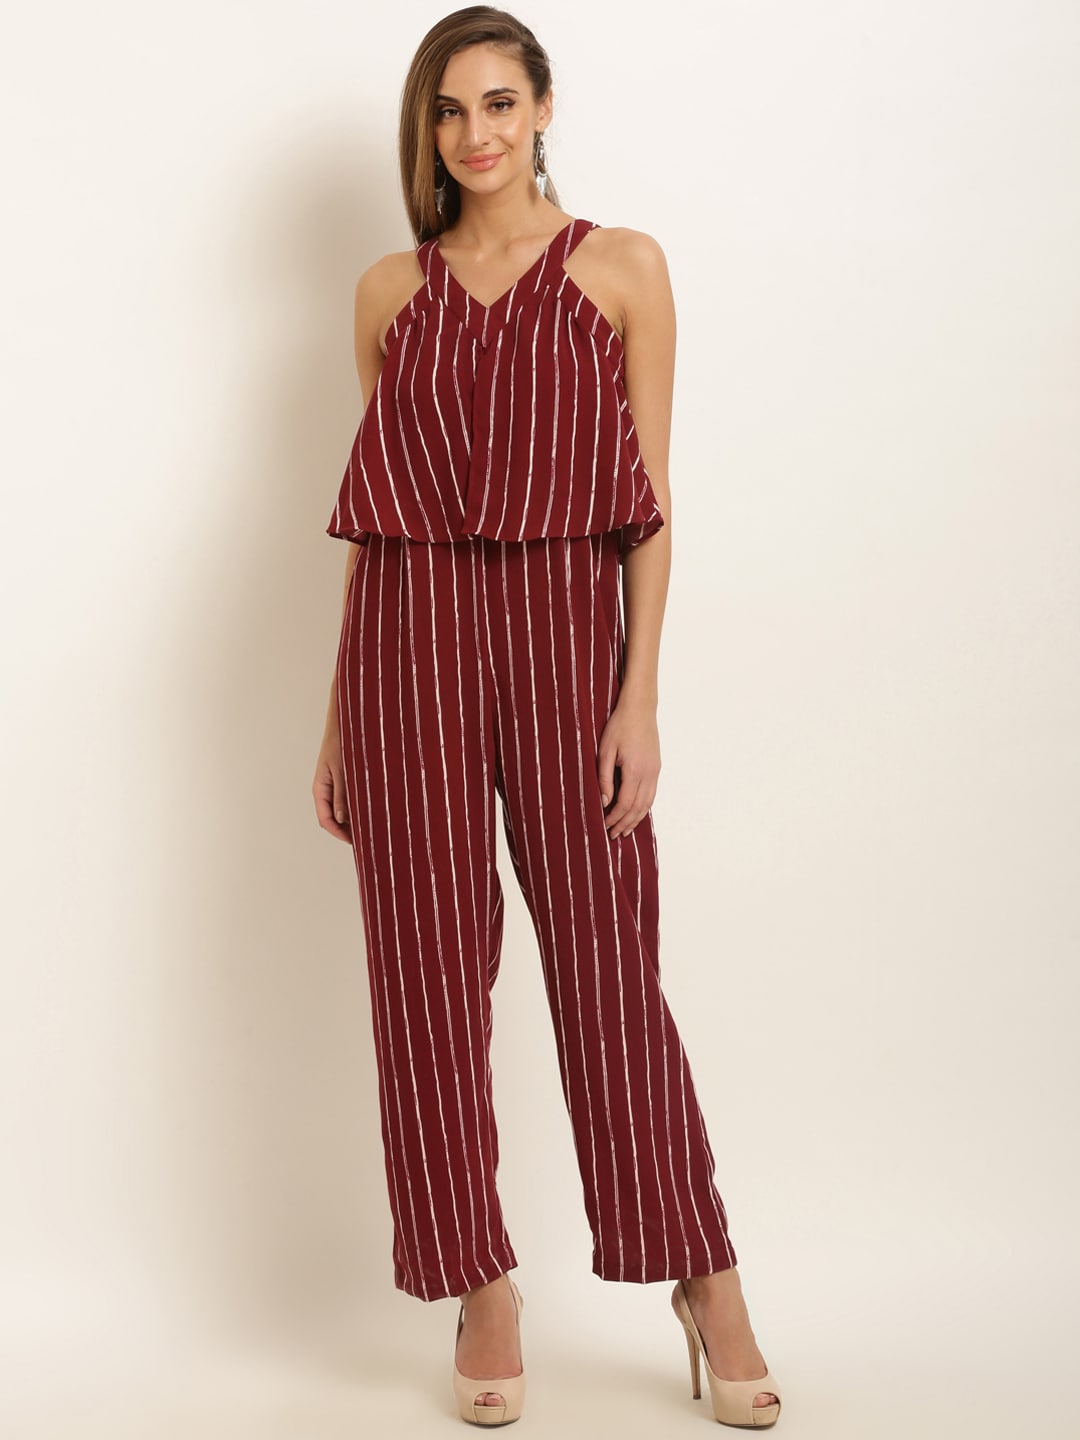 Marie Claire Maroon & White Striped Basic Jumpsuit Price in India